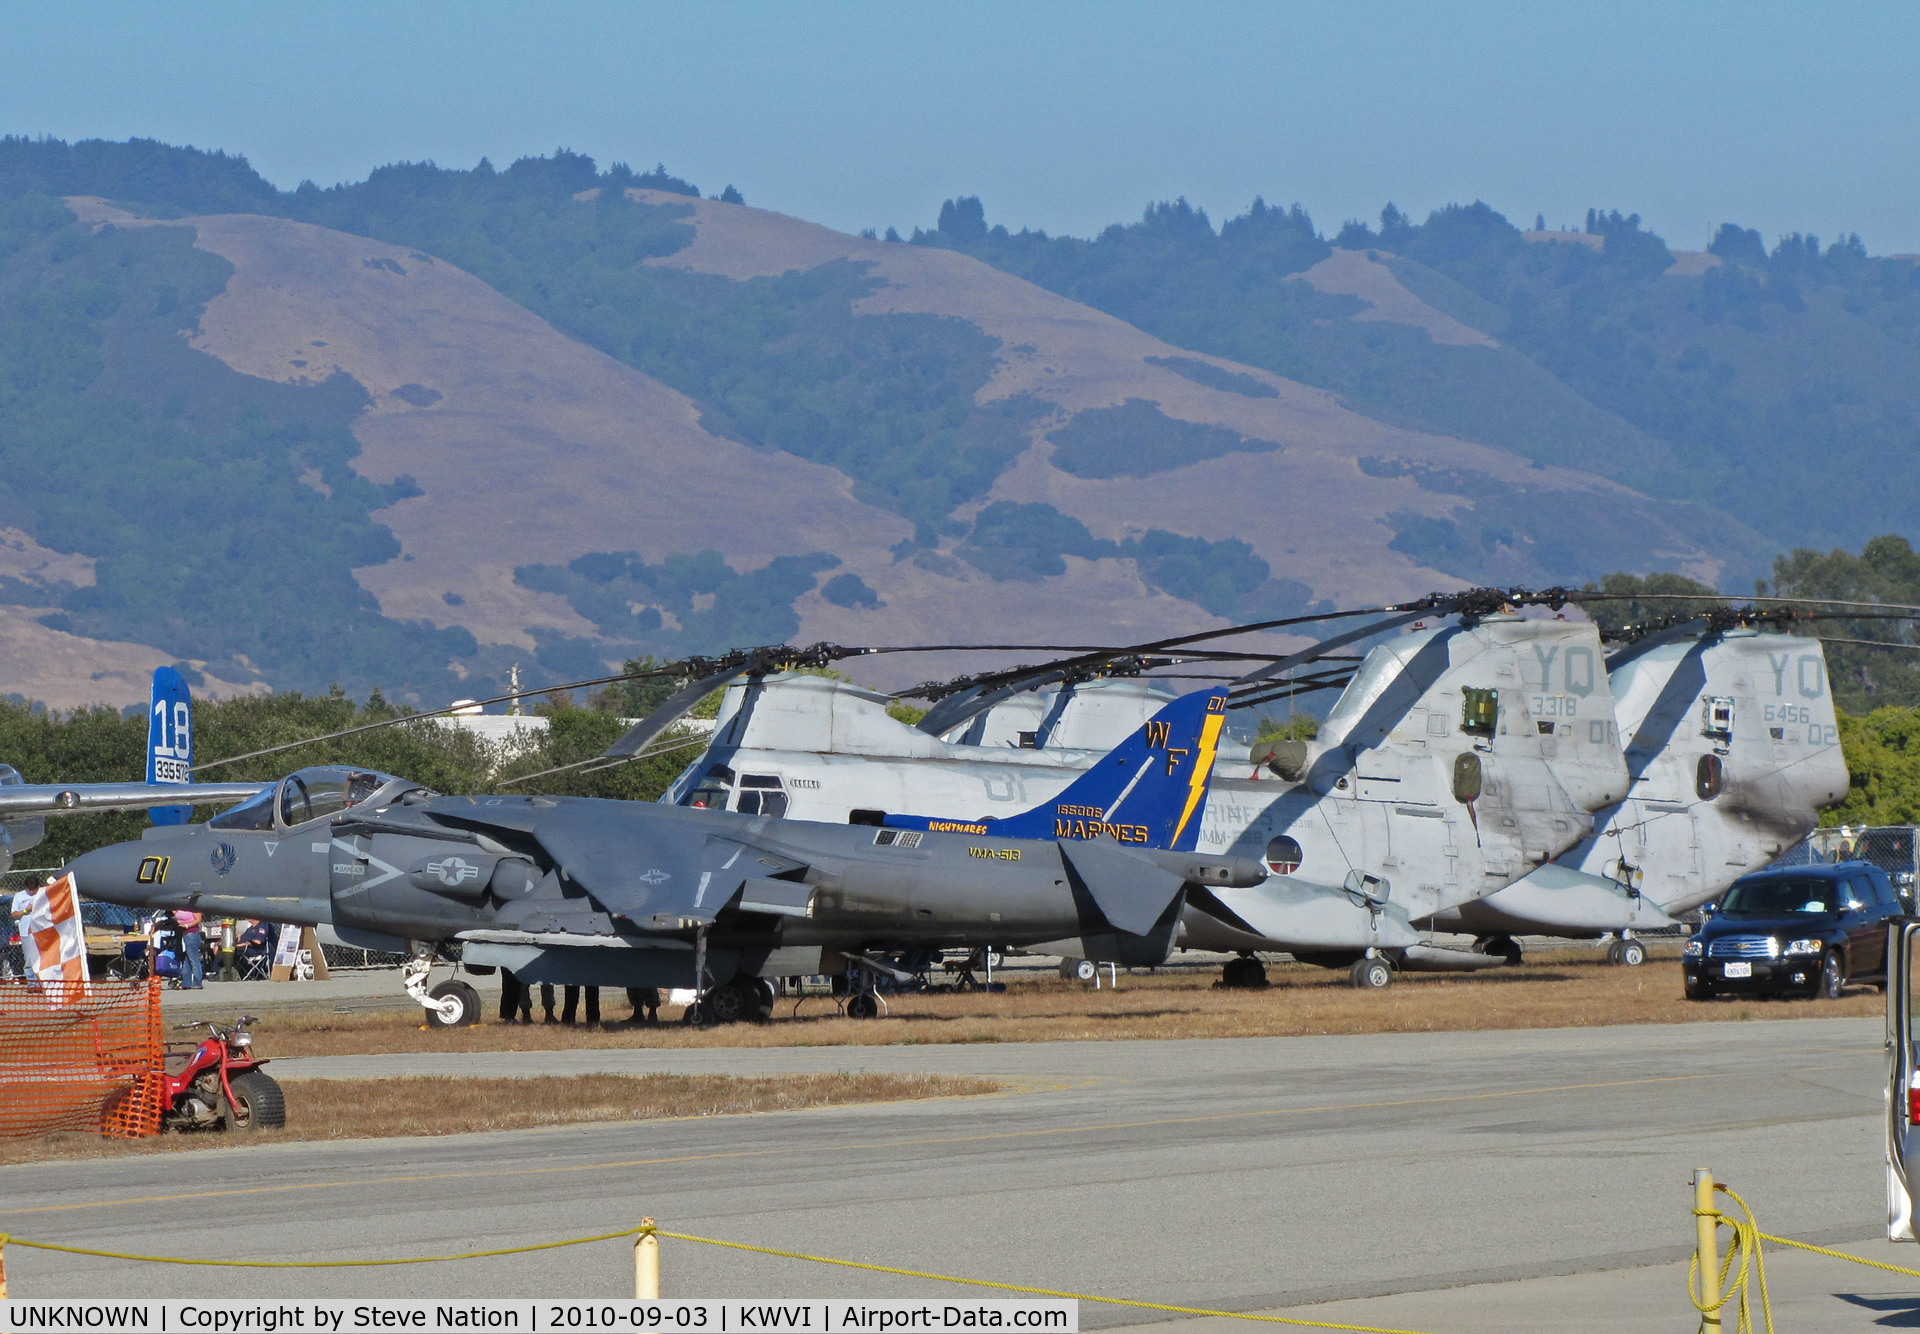 UNKNOWN, Miscellaneous Various C/N unknown, 2010 Watsonville Fly-In:VMA-513 AV-8B and HMM-268 CH-46Es on military display ramp